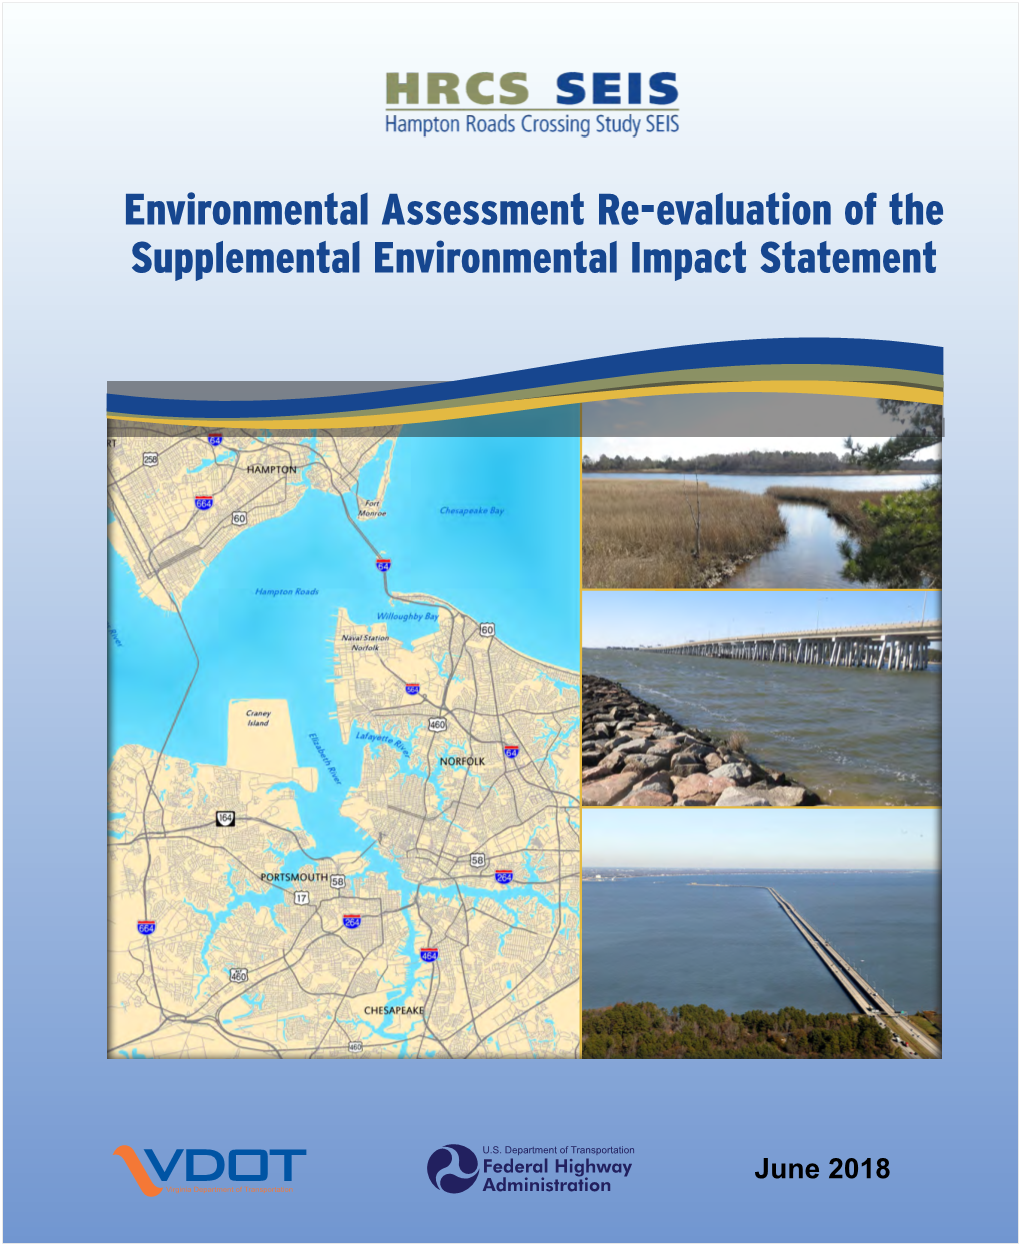 Environmental Assessment Re-Evaluation of the Supplemental Environmental Impact Statement